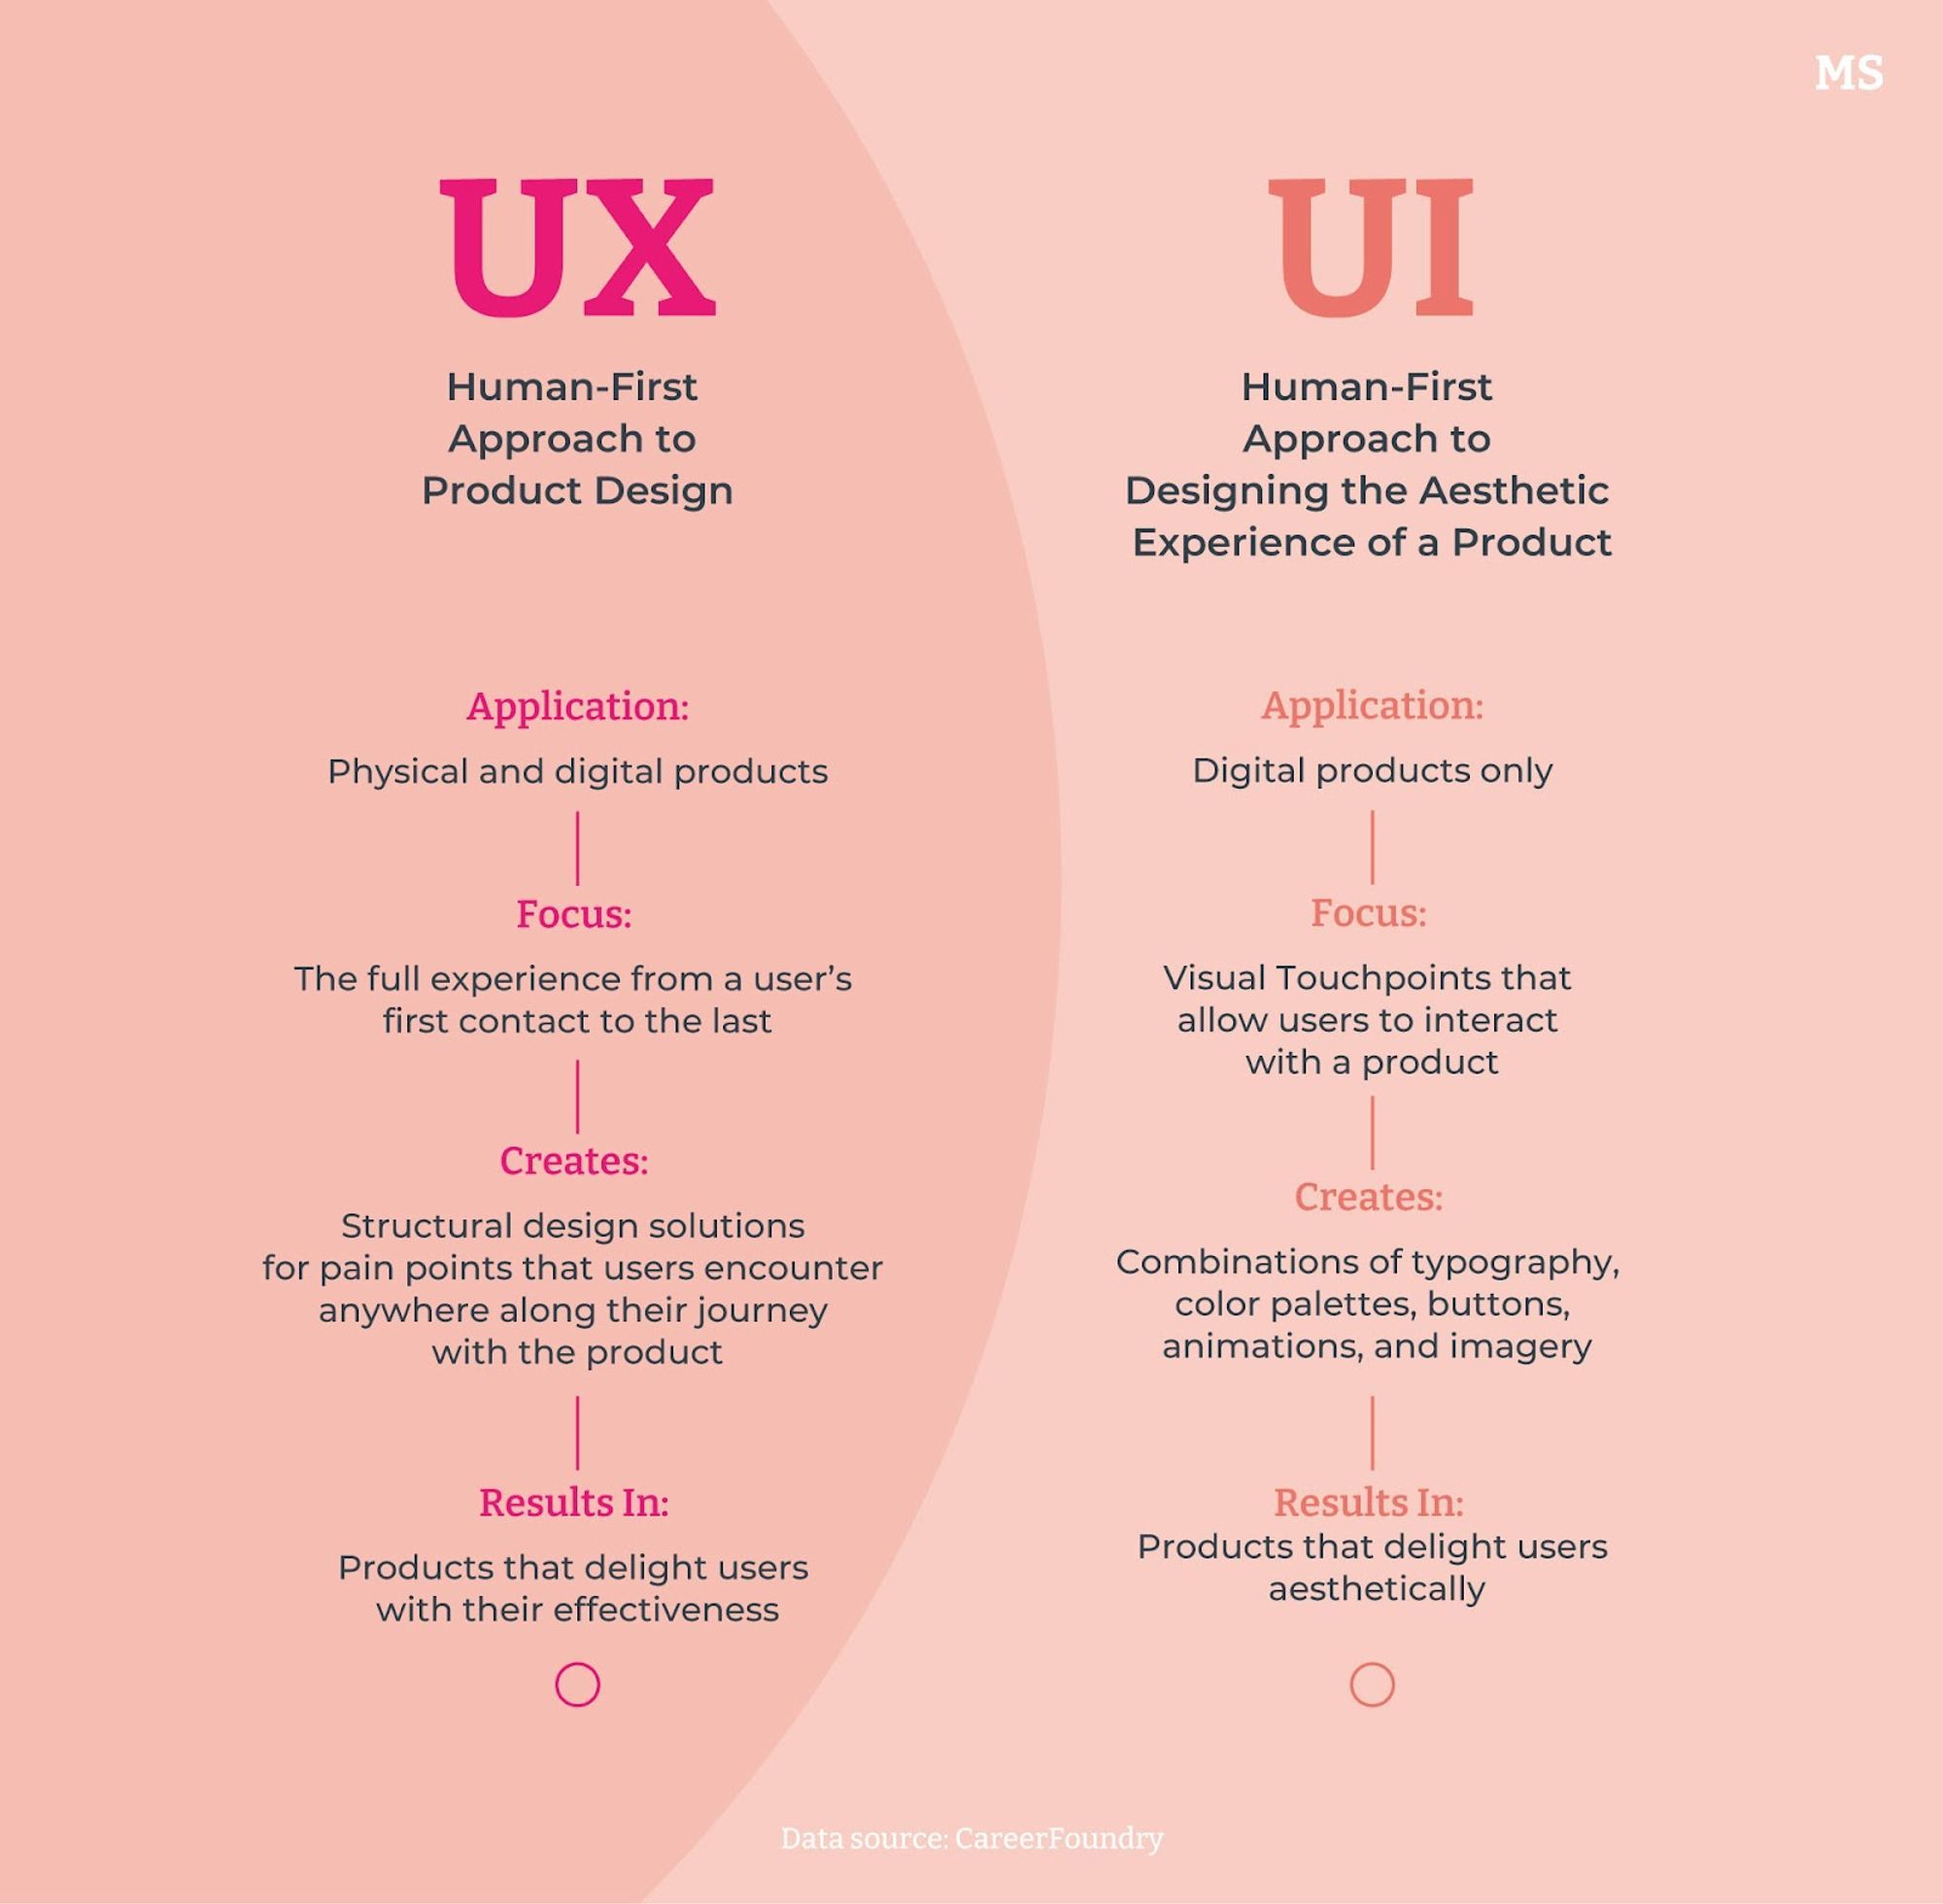 The differences between UX and UI design